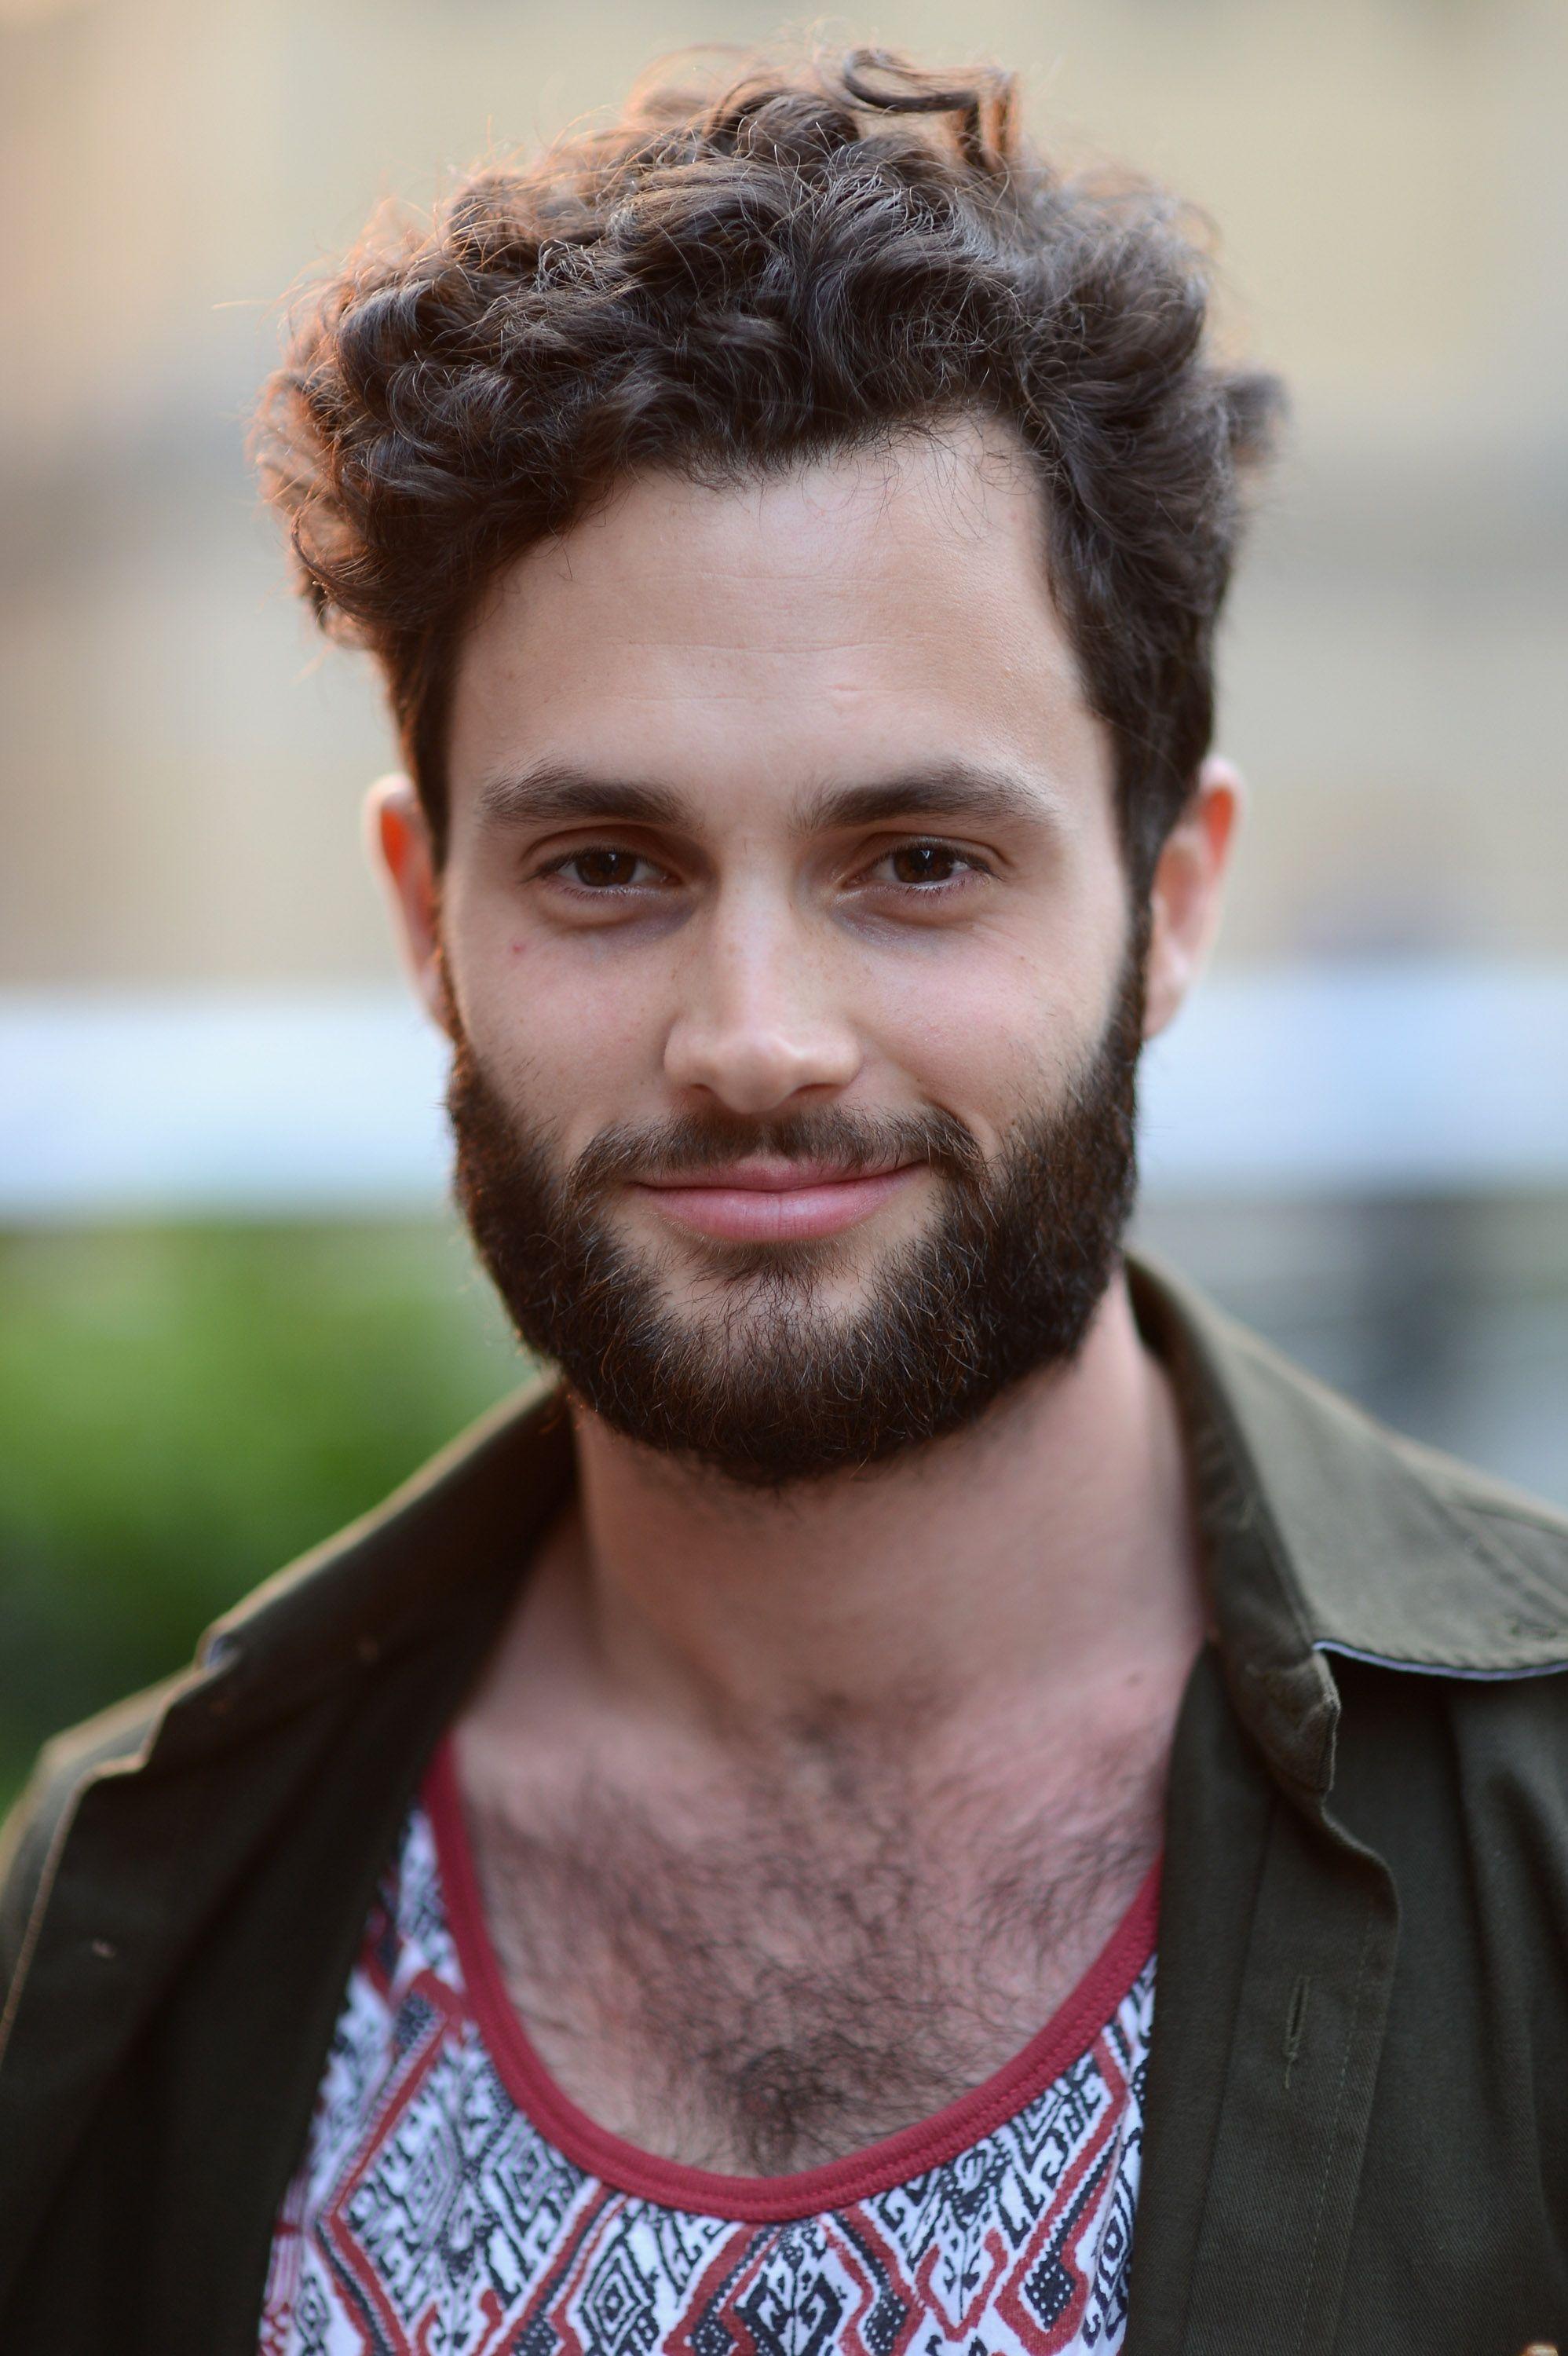 Penn Badgley High Definition Wallpapers in 2019.